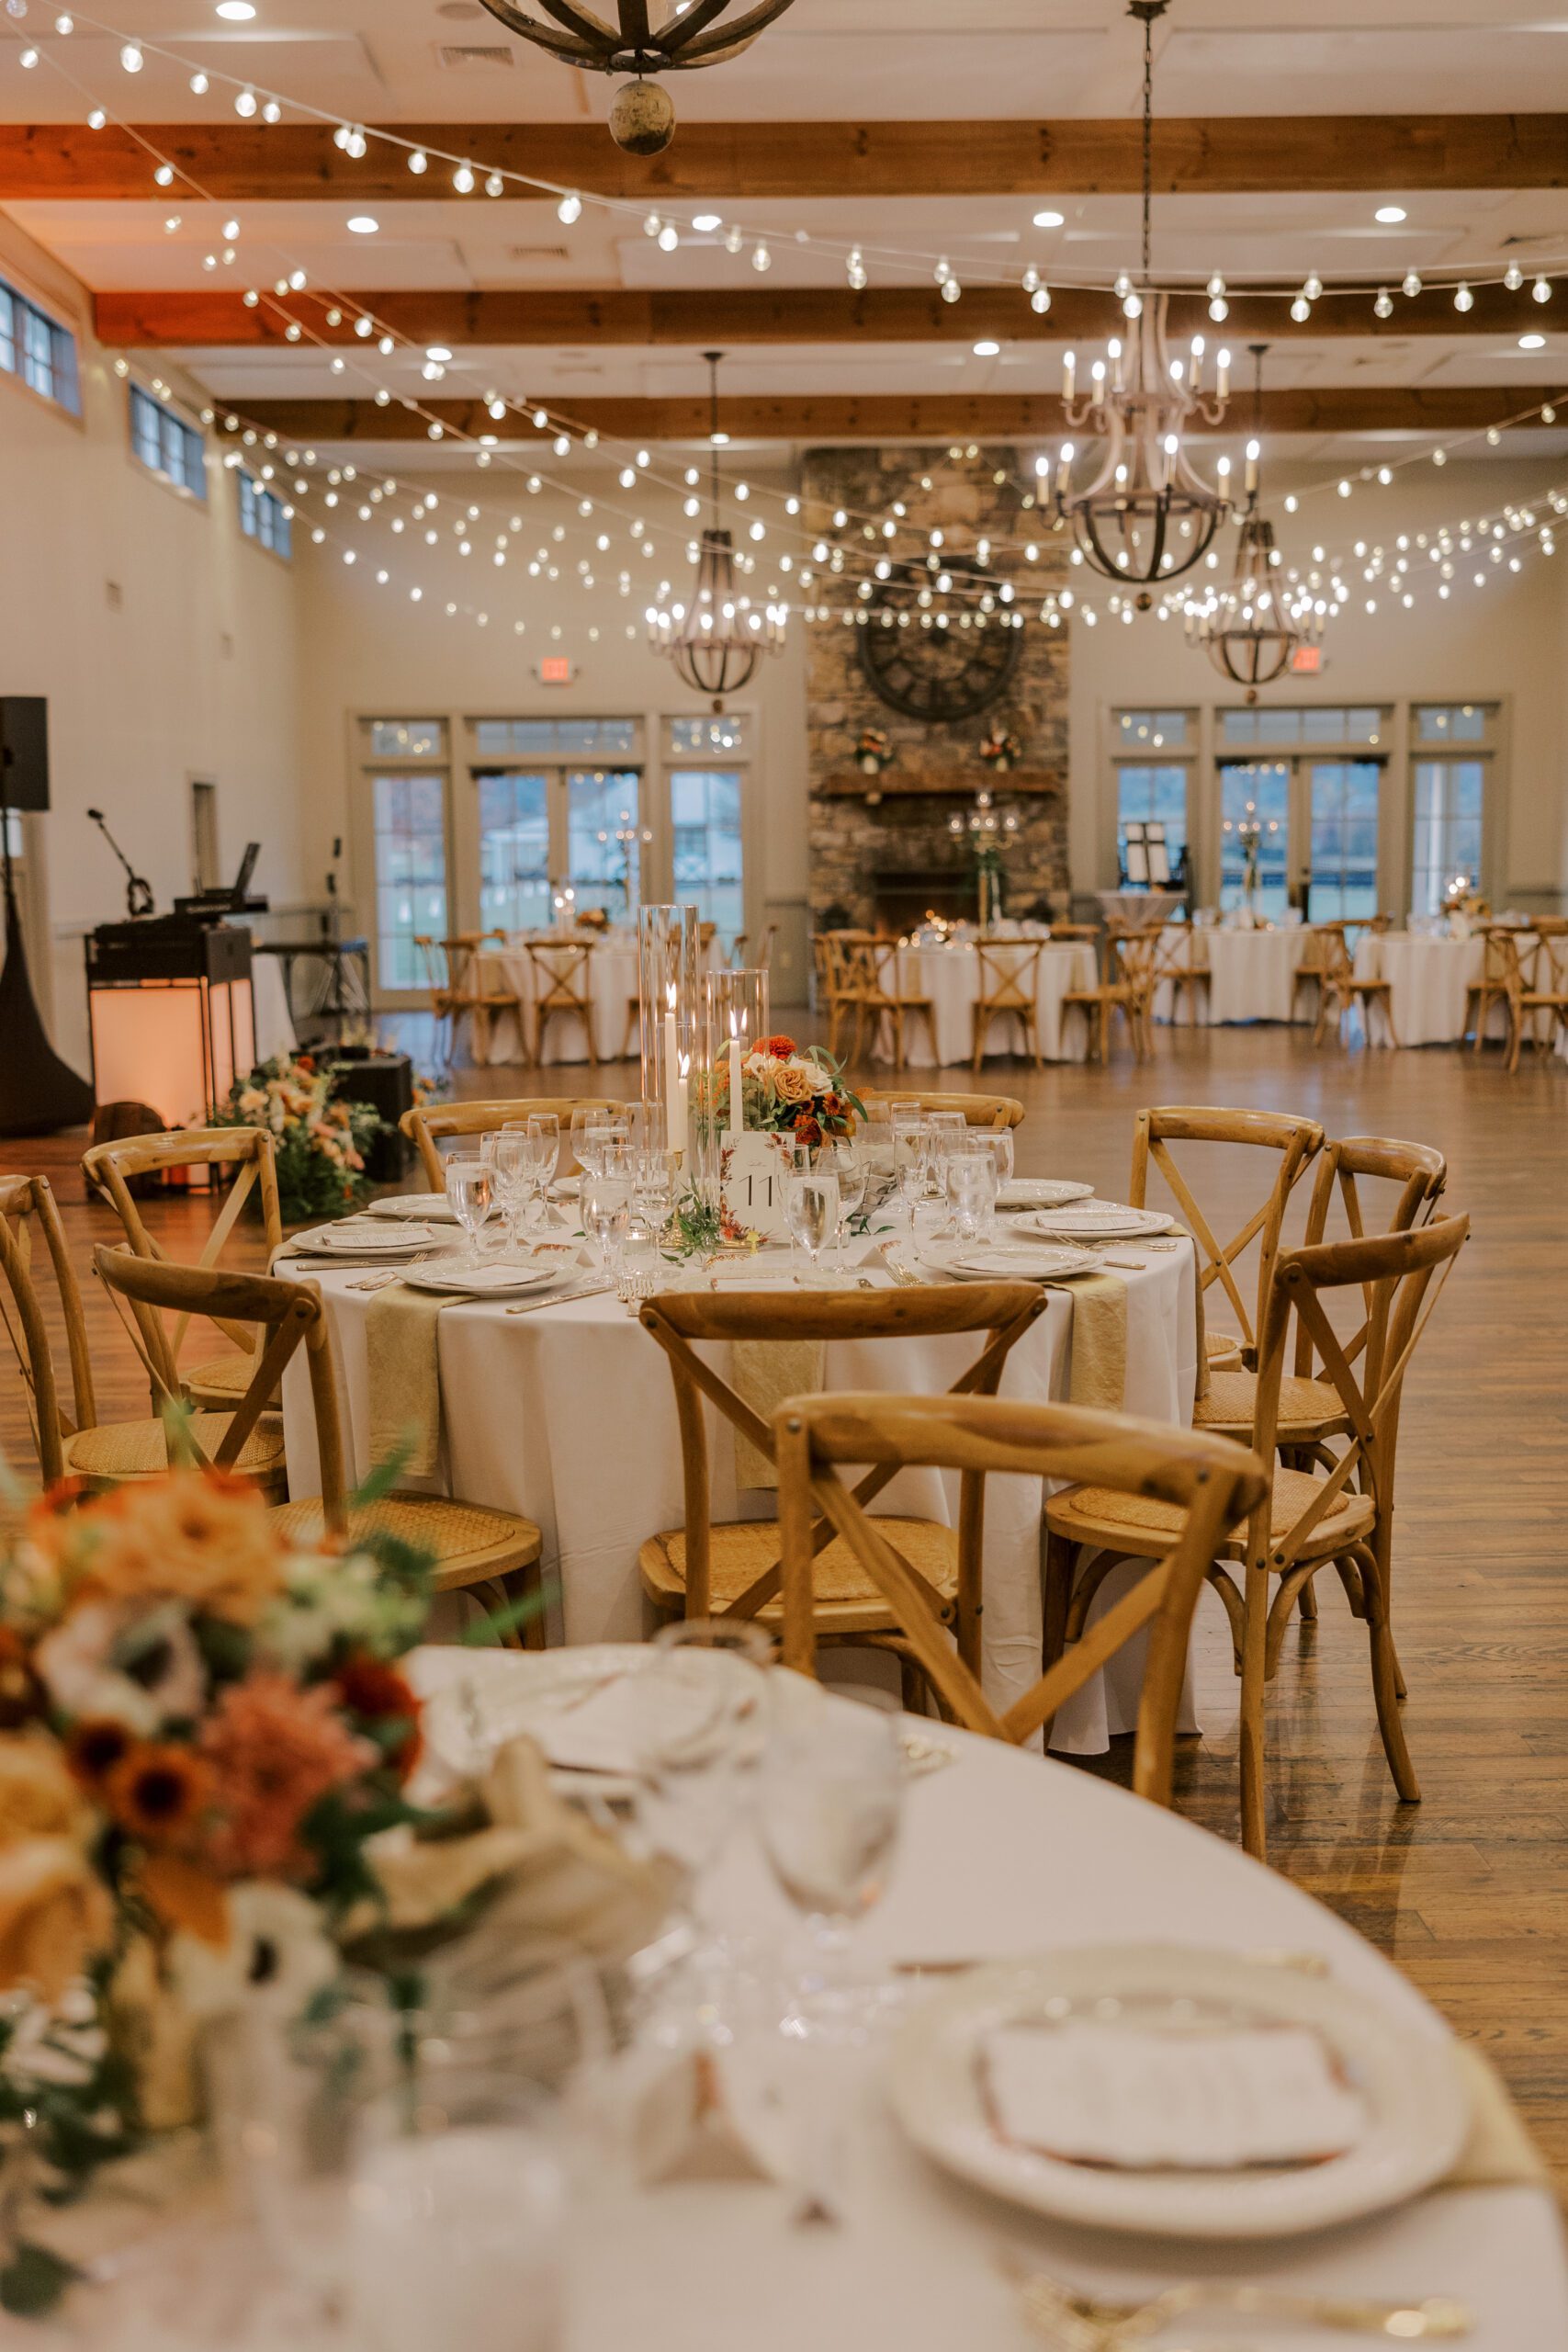 Tables at the reception with light wooden chairs, fall colored flowers and candles as the centerpieces, with string lighting overhead